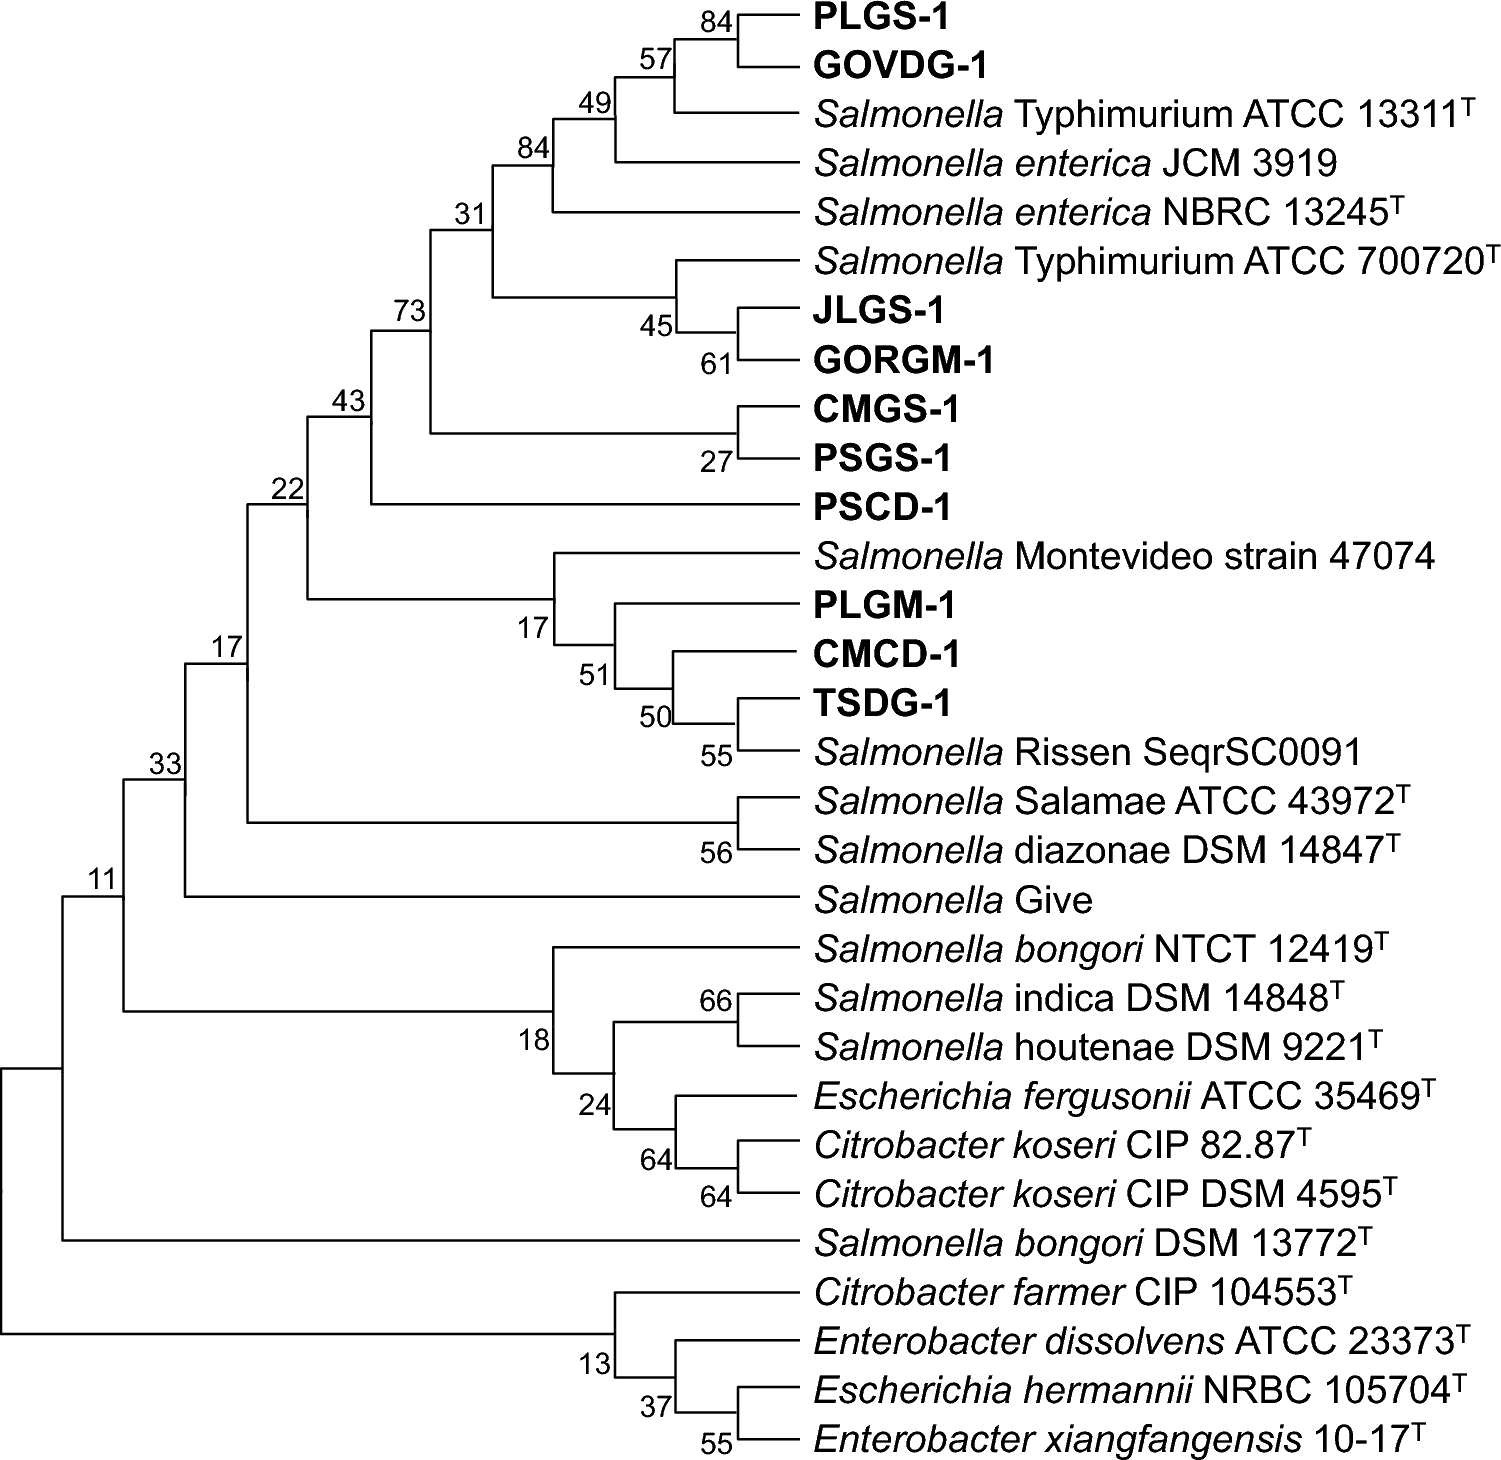 Prevalence of Indigenous Antibiotic-Resistant Salmonella Isolates and Their Application to Explore a Lytic Phage vB_SalS_KFSSM with an Intra-Broad Specificity